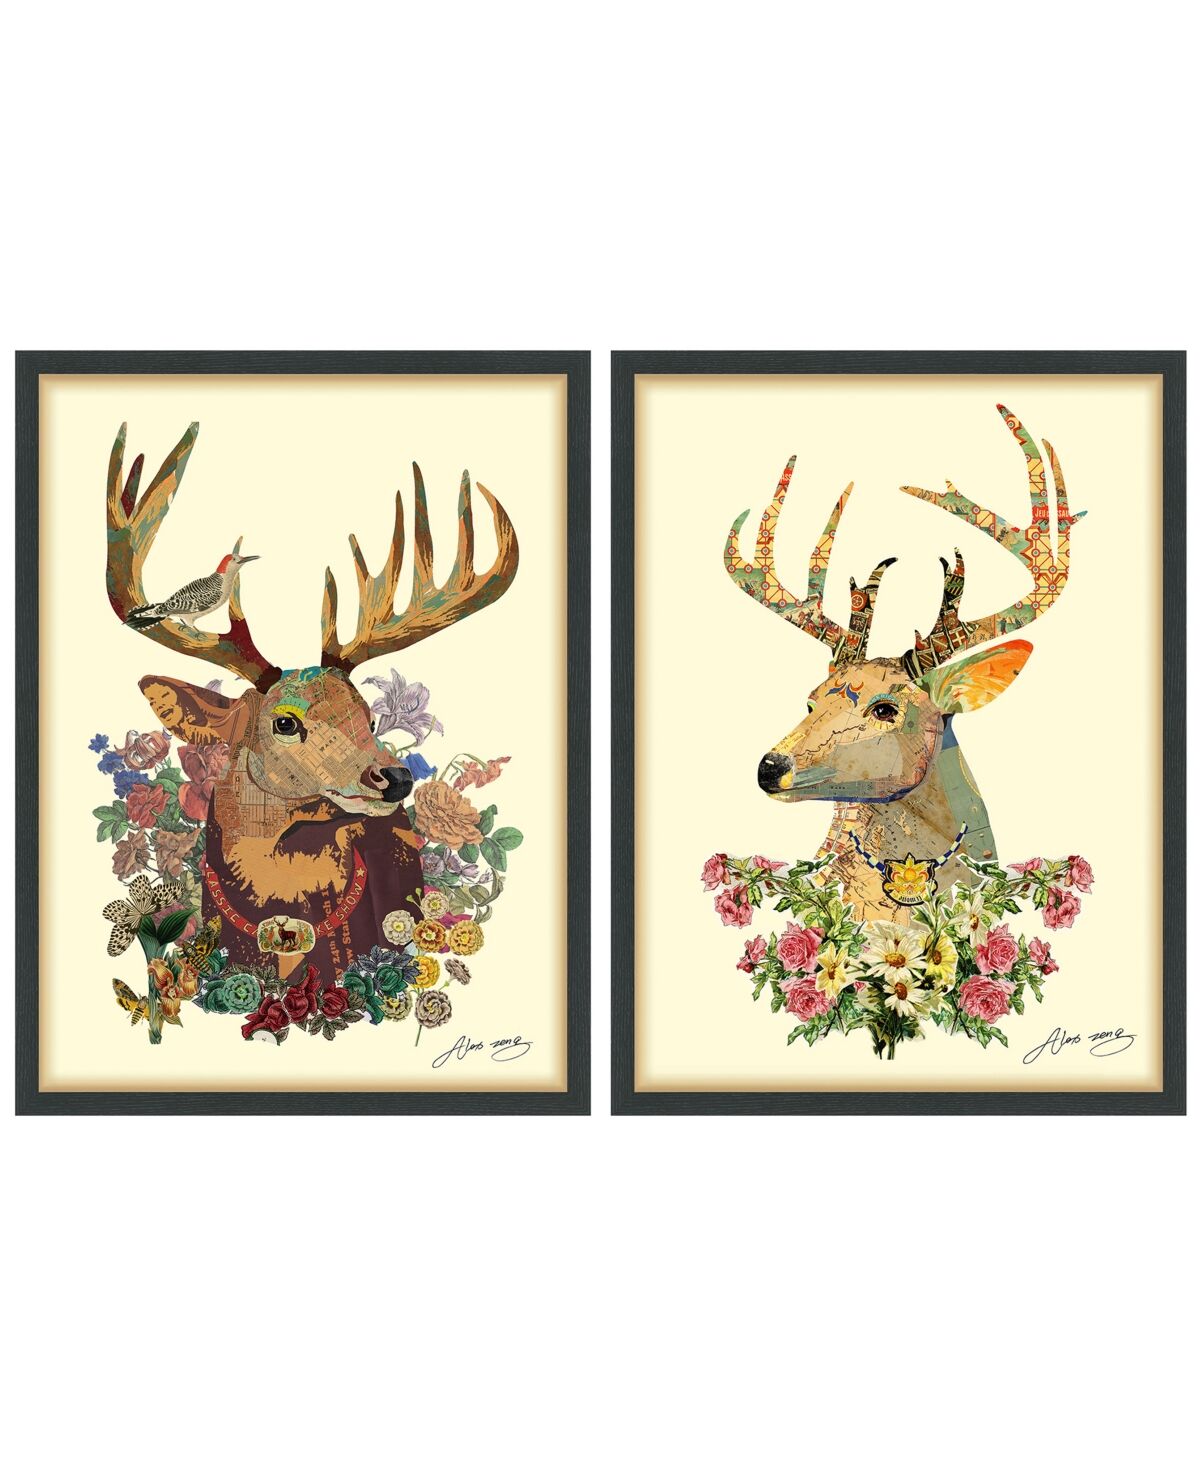 Empire Art Direct Mr. and Mrs. Deer Dimensional Collage Framed Graphic Art Under Glass Wall Art, 33